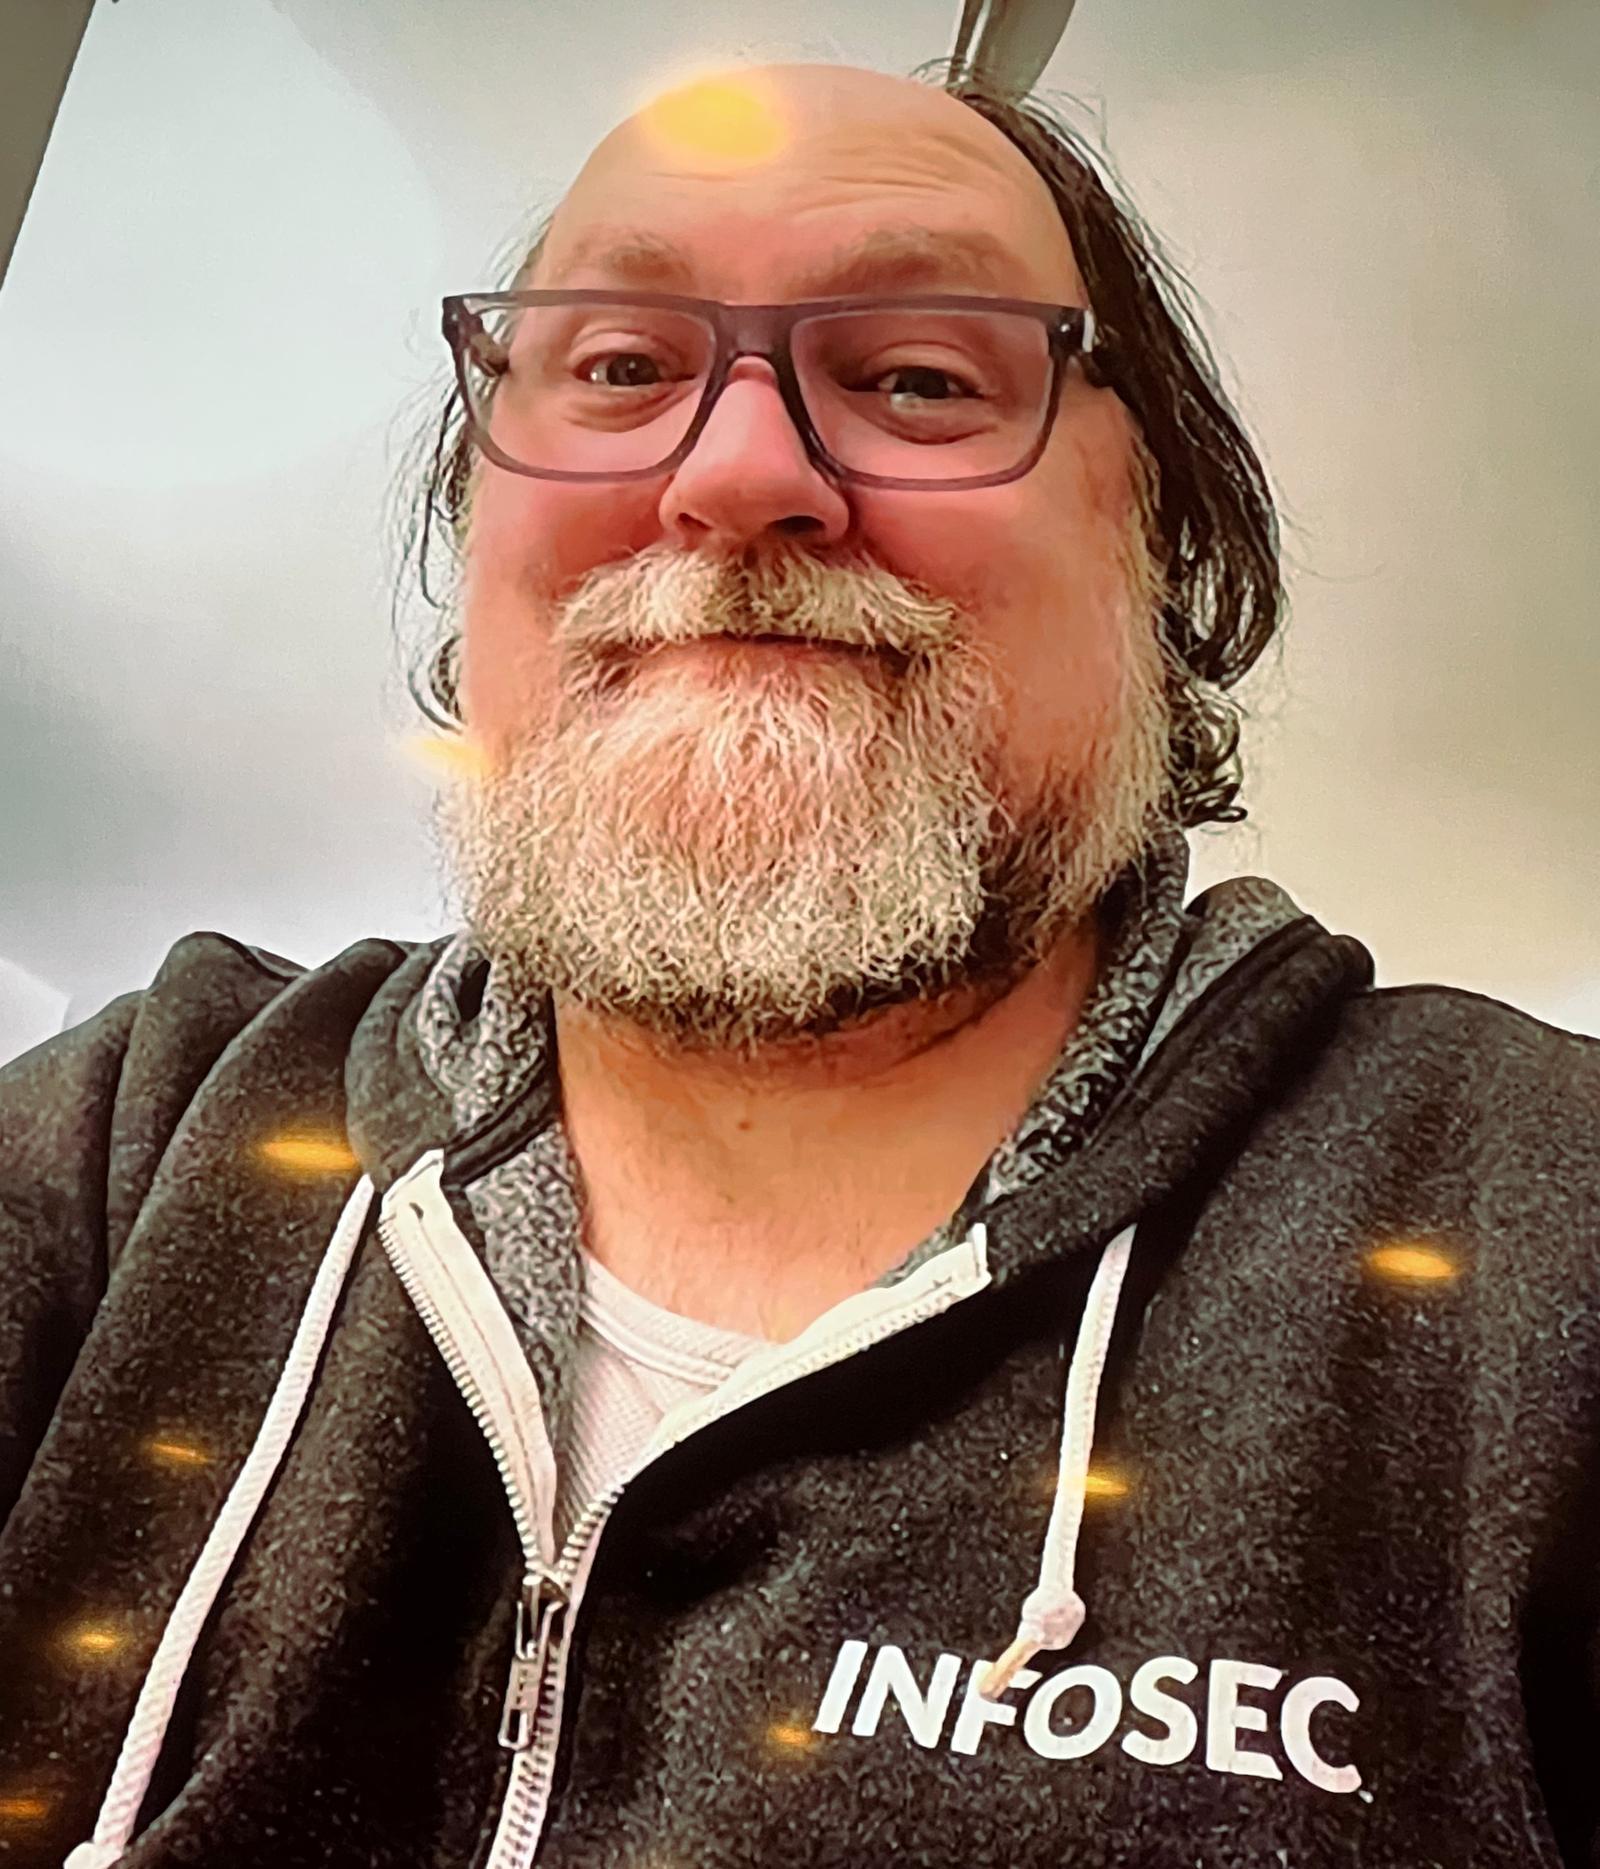 Erik wears a jacket with the INFOSEC brand on it.